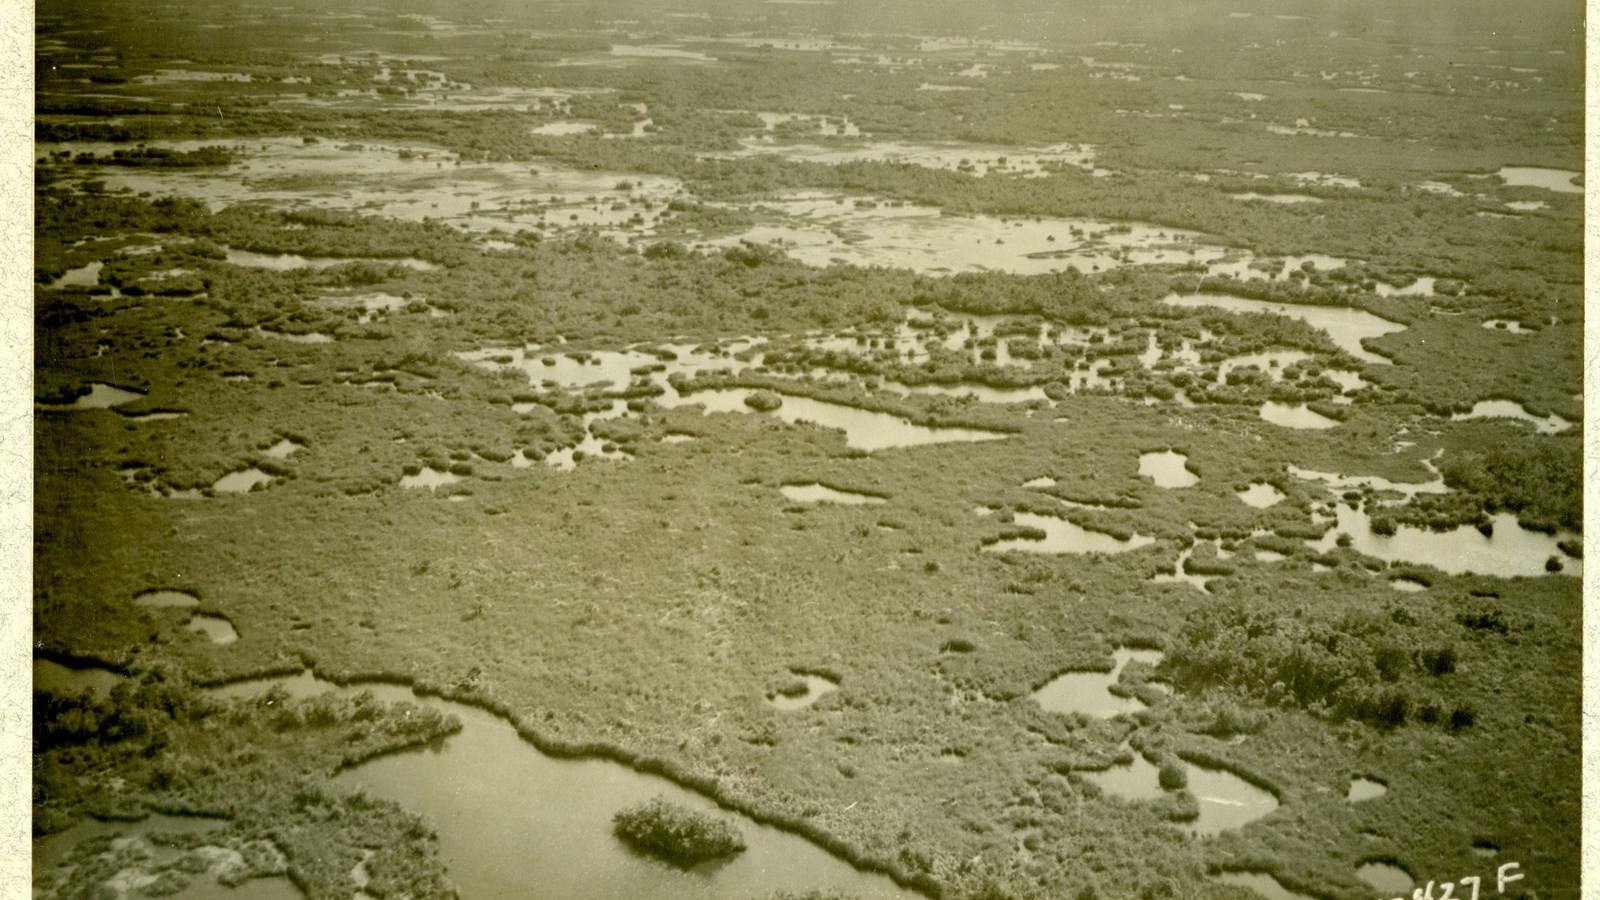 Aerial view of area with many greenery but lots of water spread out, like a swampy area